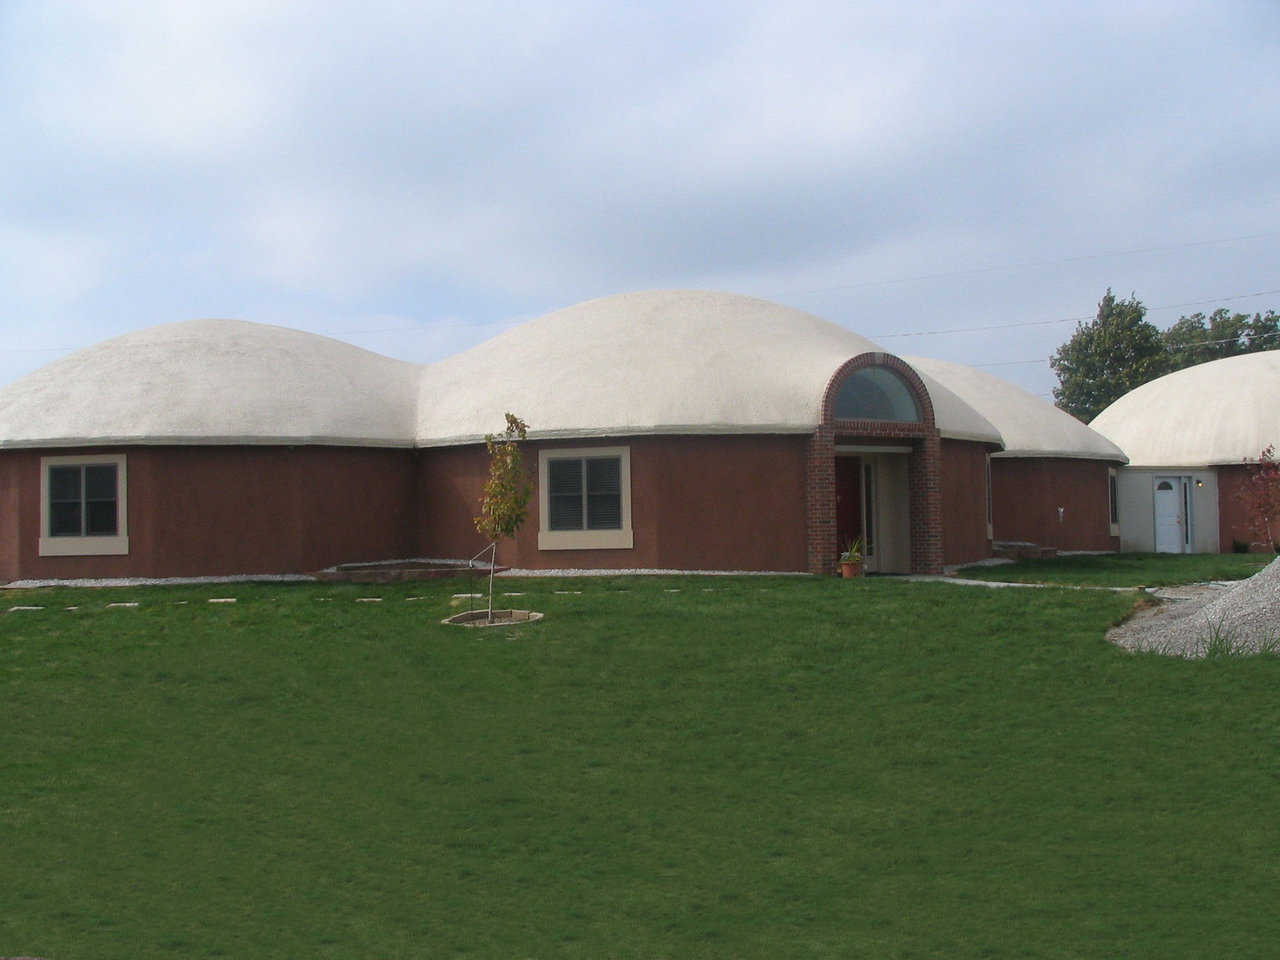 Mabel and Jack Boyt — The Boyts, owners of three interconnected domes with a living area of 4600 square feet, had a “wonderful” tour day.